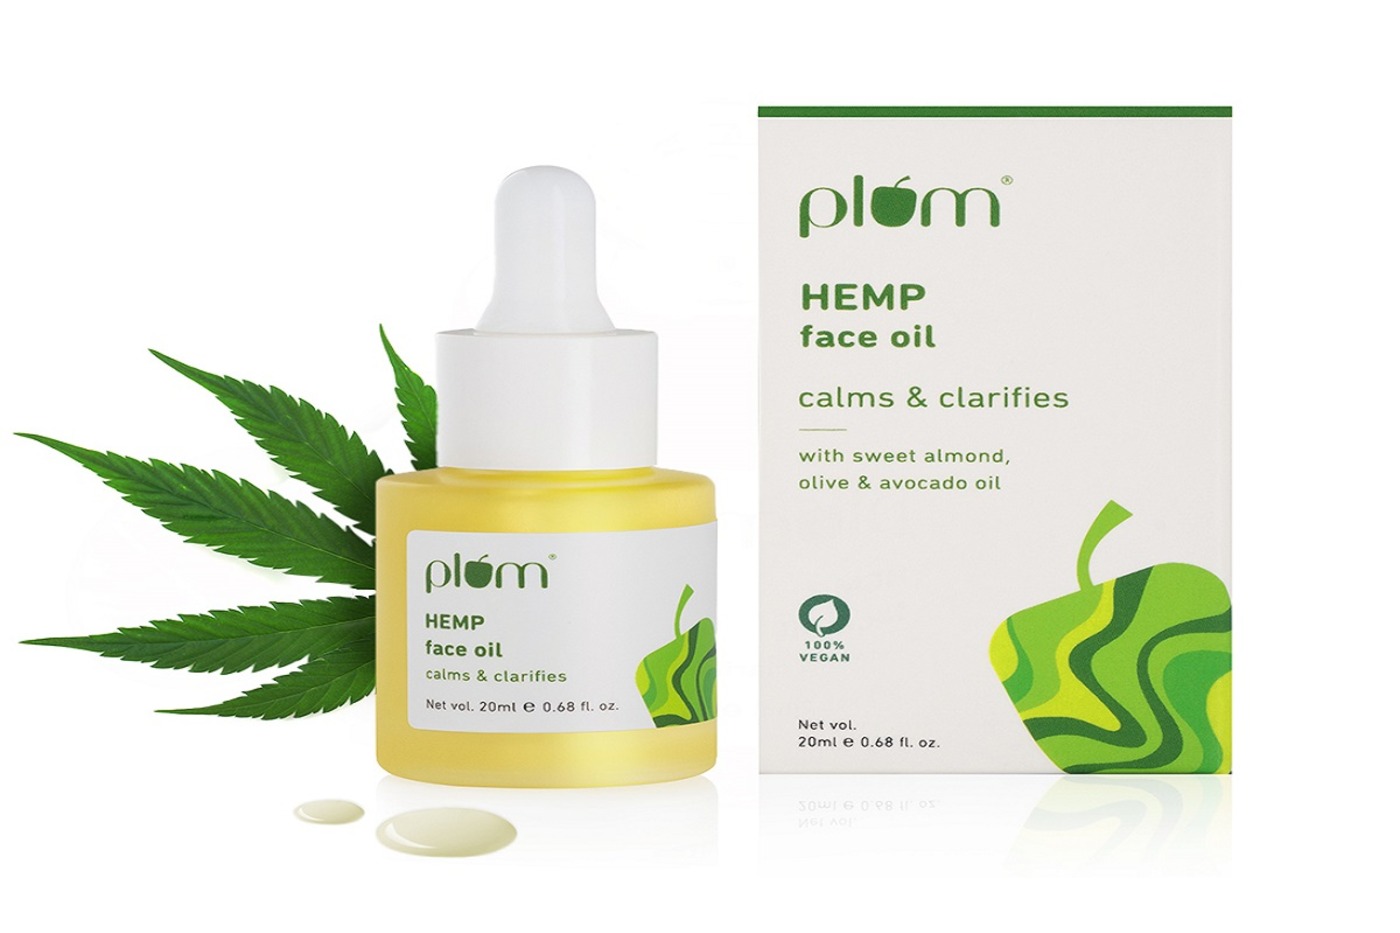 Plum releases a new range of products with hemp